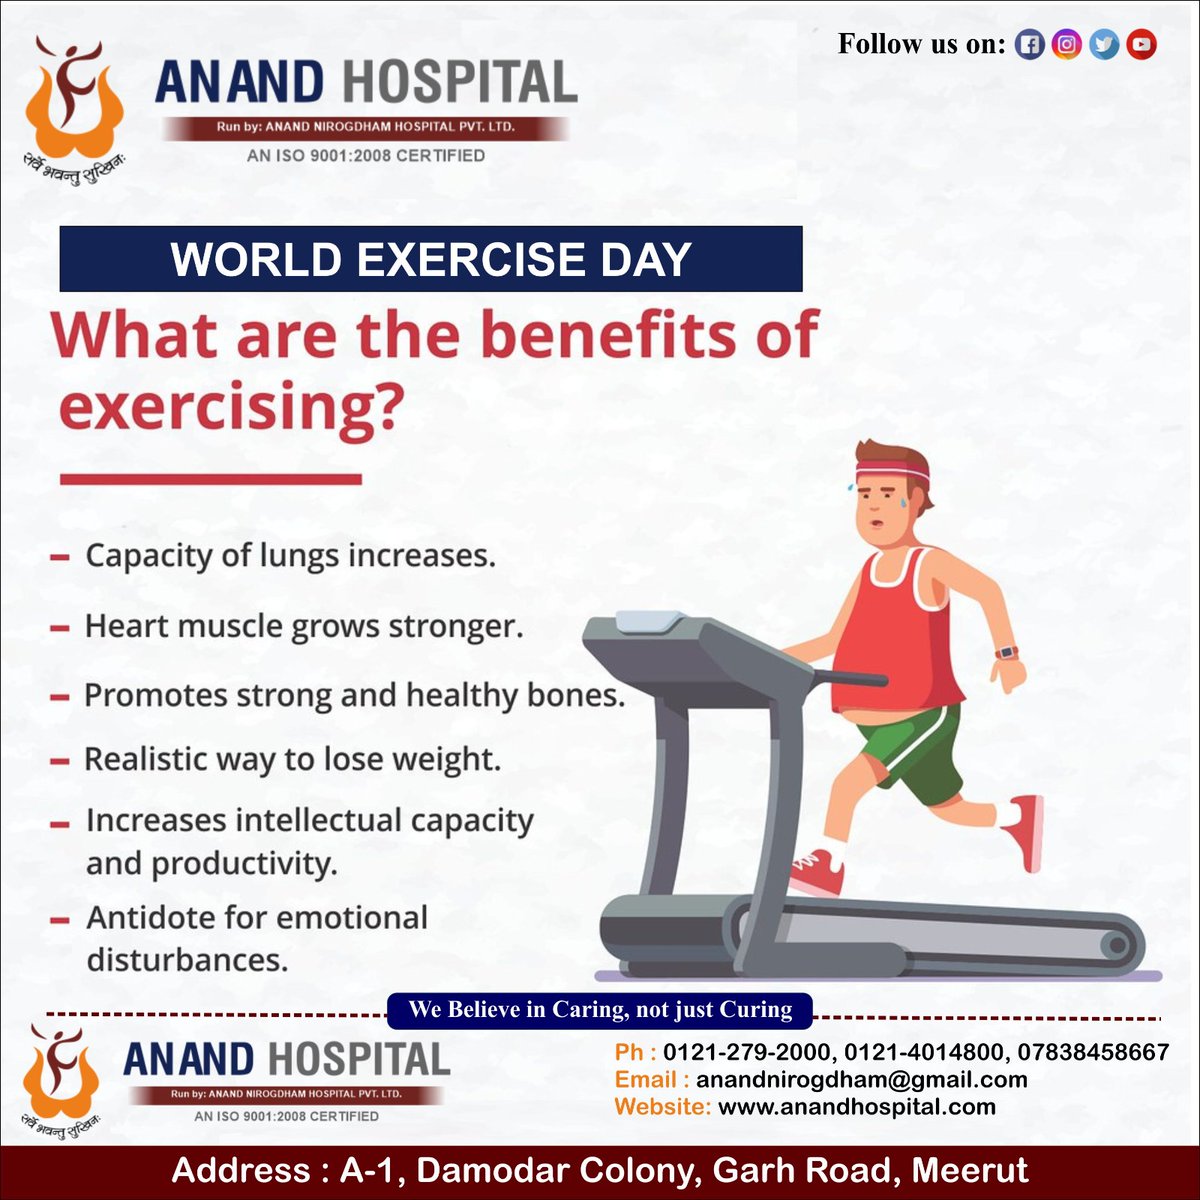 WORLD EXERCISE DAY
What are the benefits of exercising?
👉Capacity of lungs increases.
👉Heart muscle grows stronger.

#doctor #medical #medicine #nurse #health  #surgeon #nursing #medicalstudent #nurses #instagram #care #anandhospital #anandhospitalmeerut #worldexerciseday